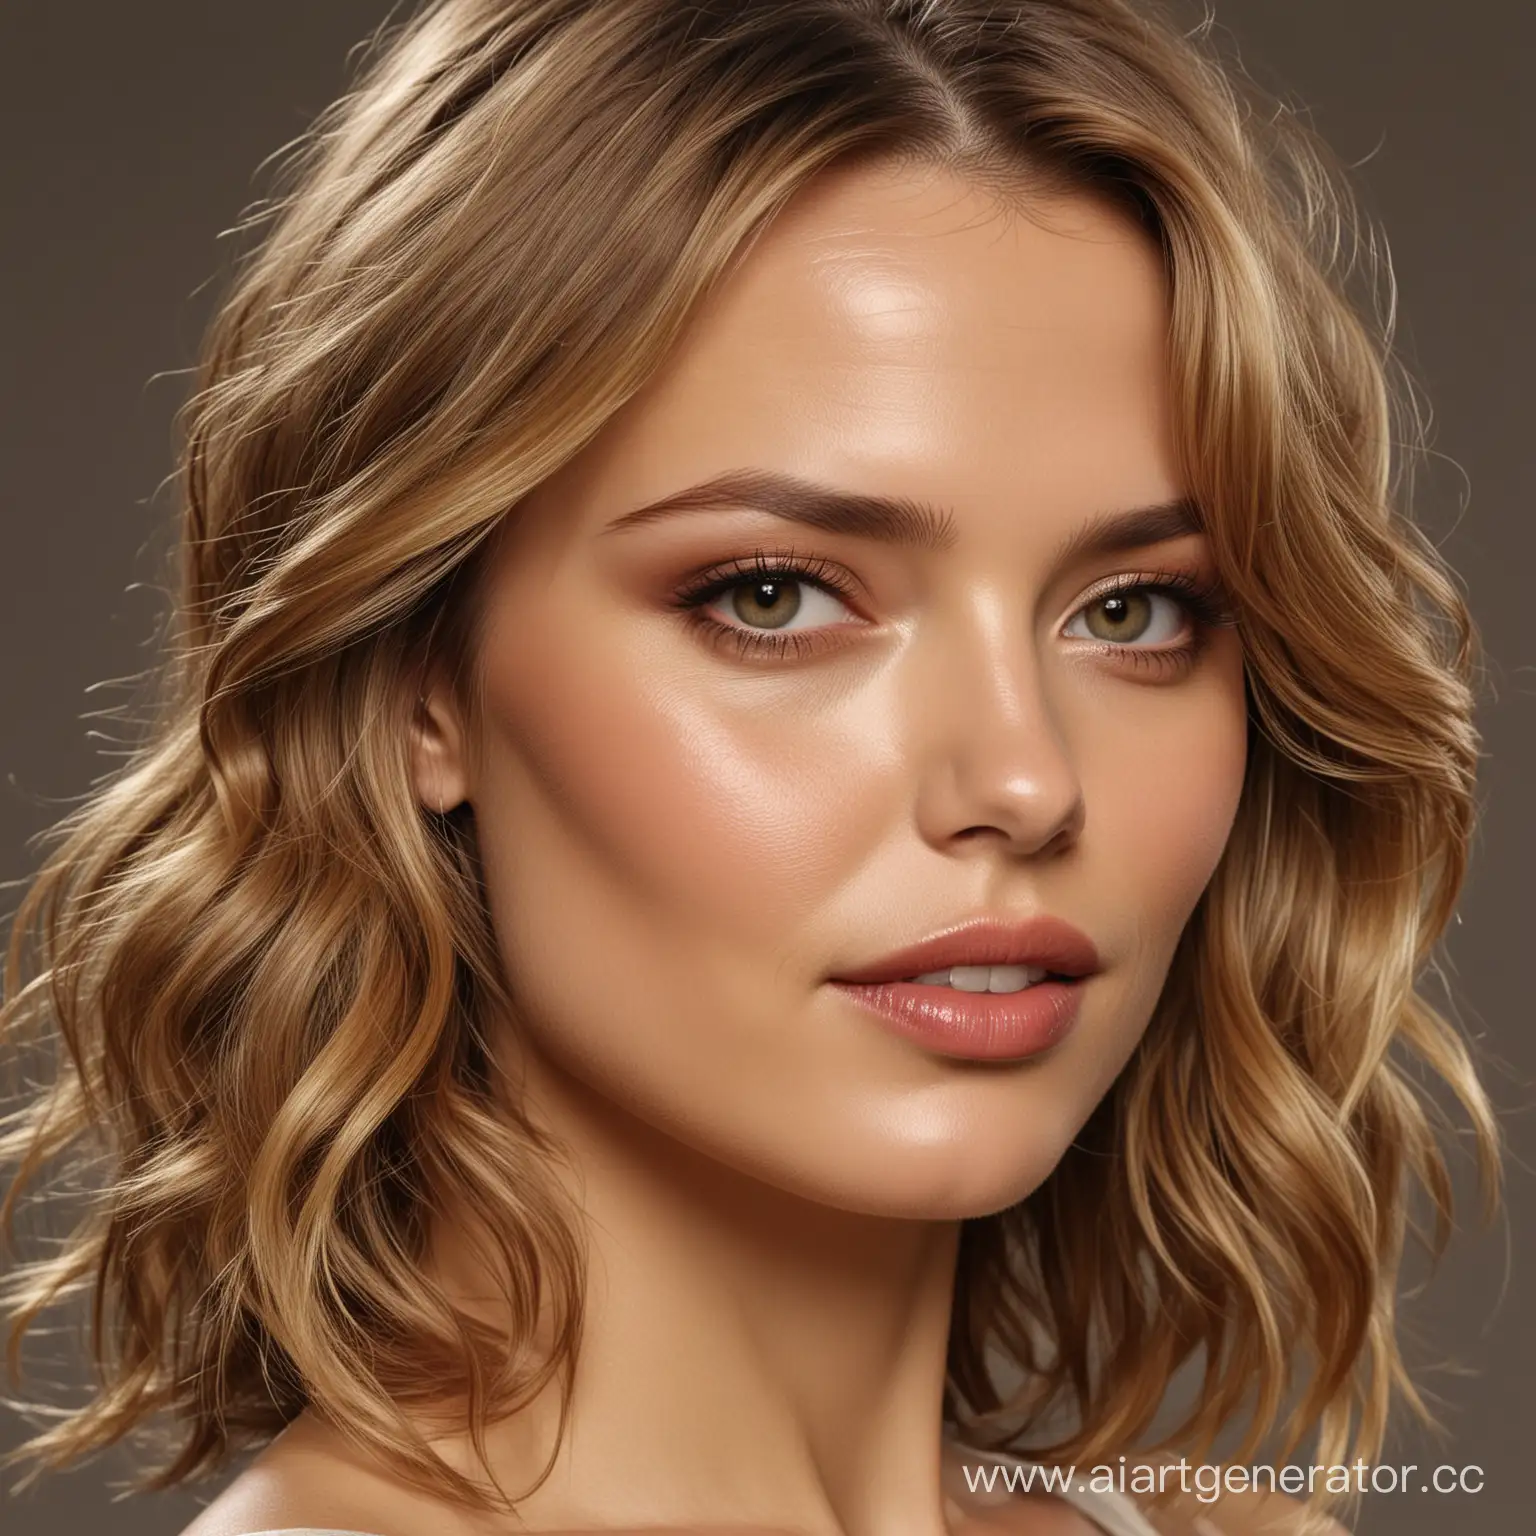 Sensual-Elegance-Nude-Natalia-Vodianova-with-Blended-Celebrity-Facial-Features-in-Low-Angle-Shot